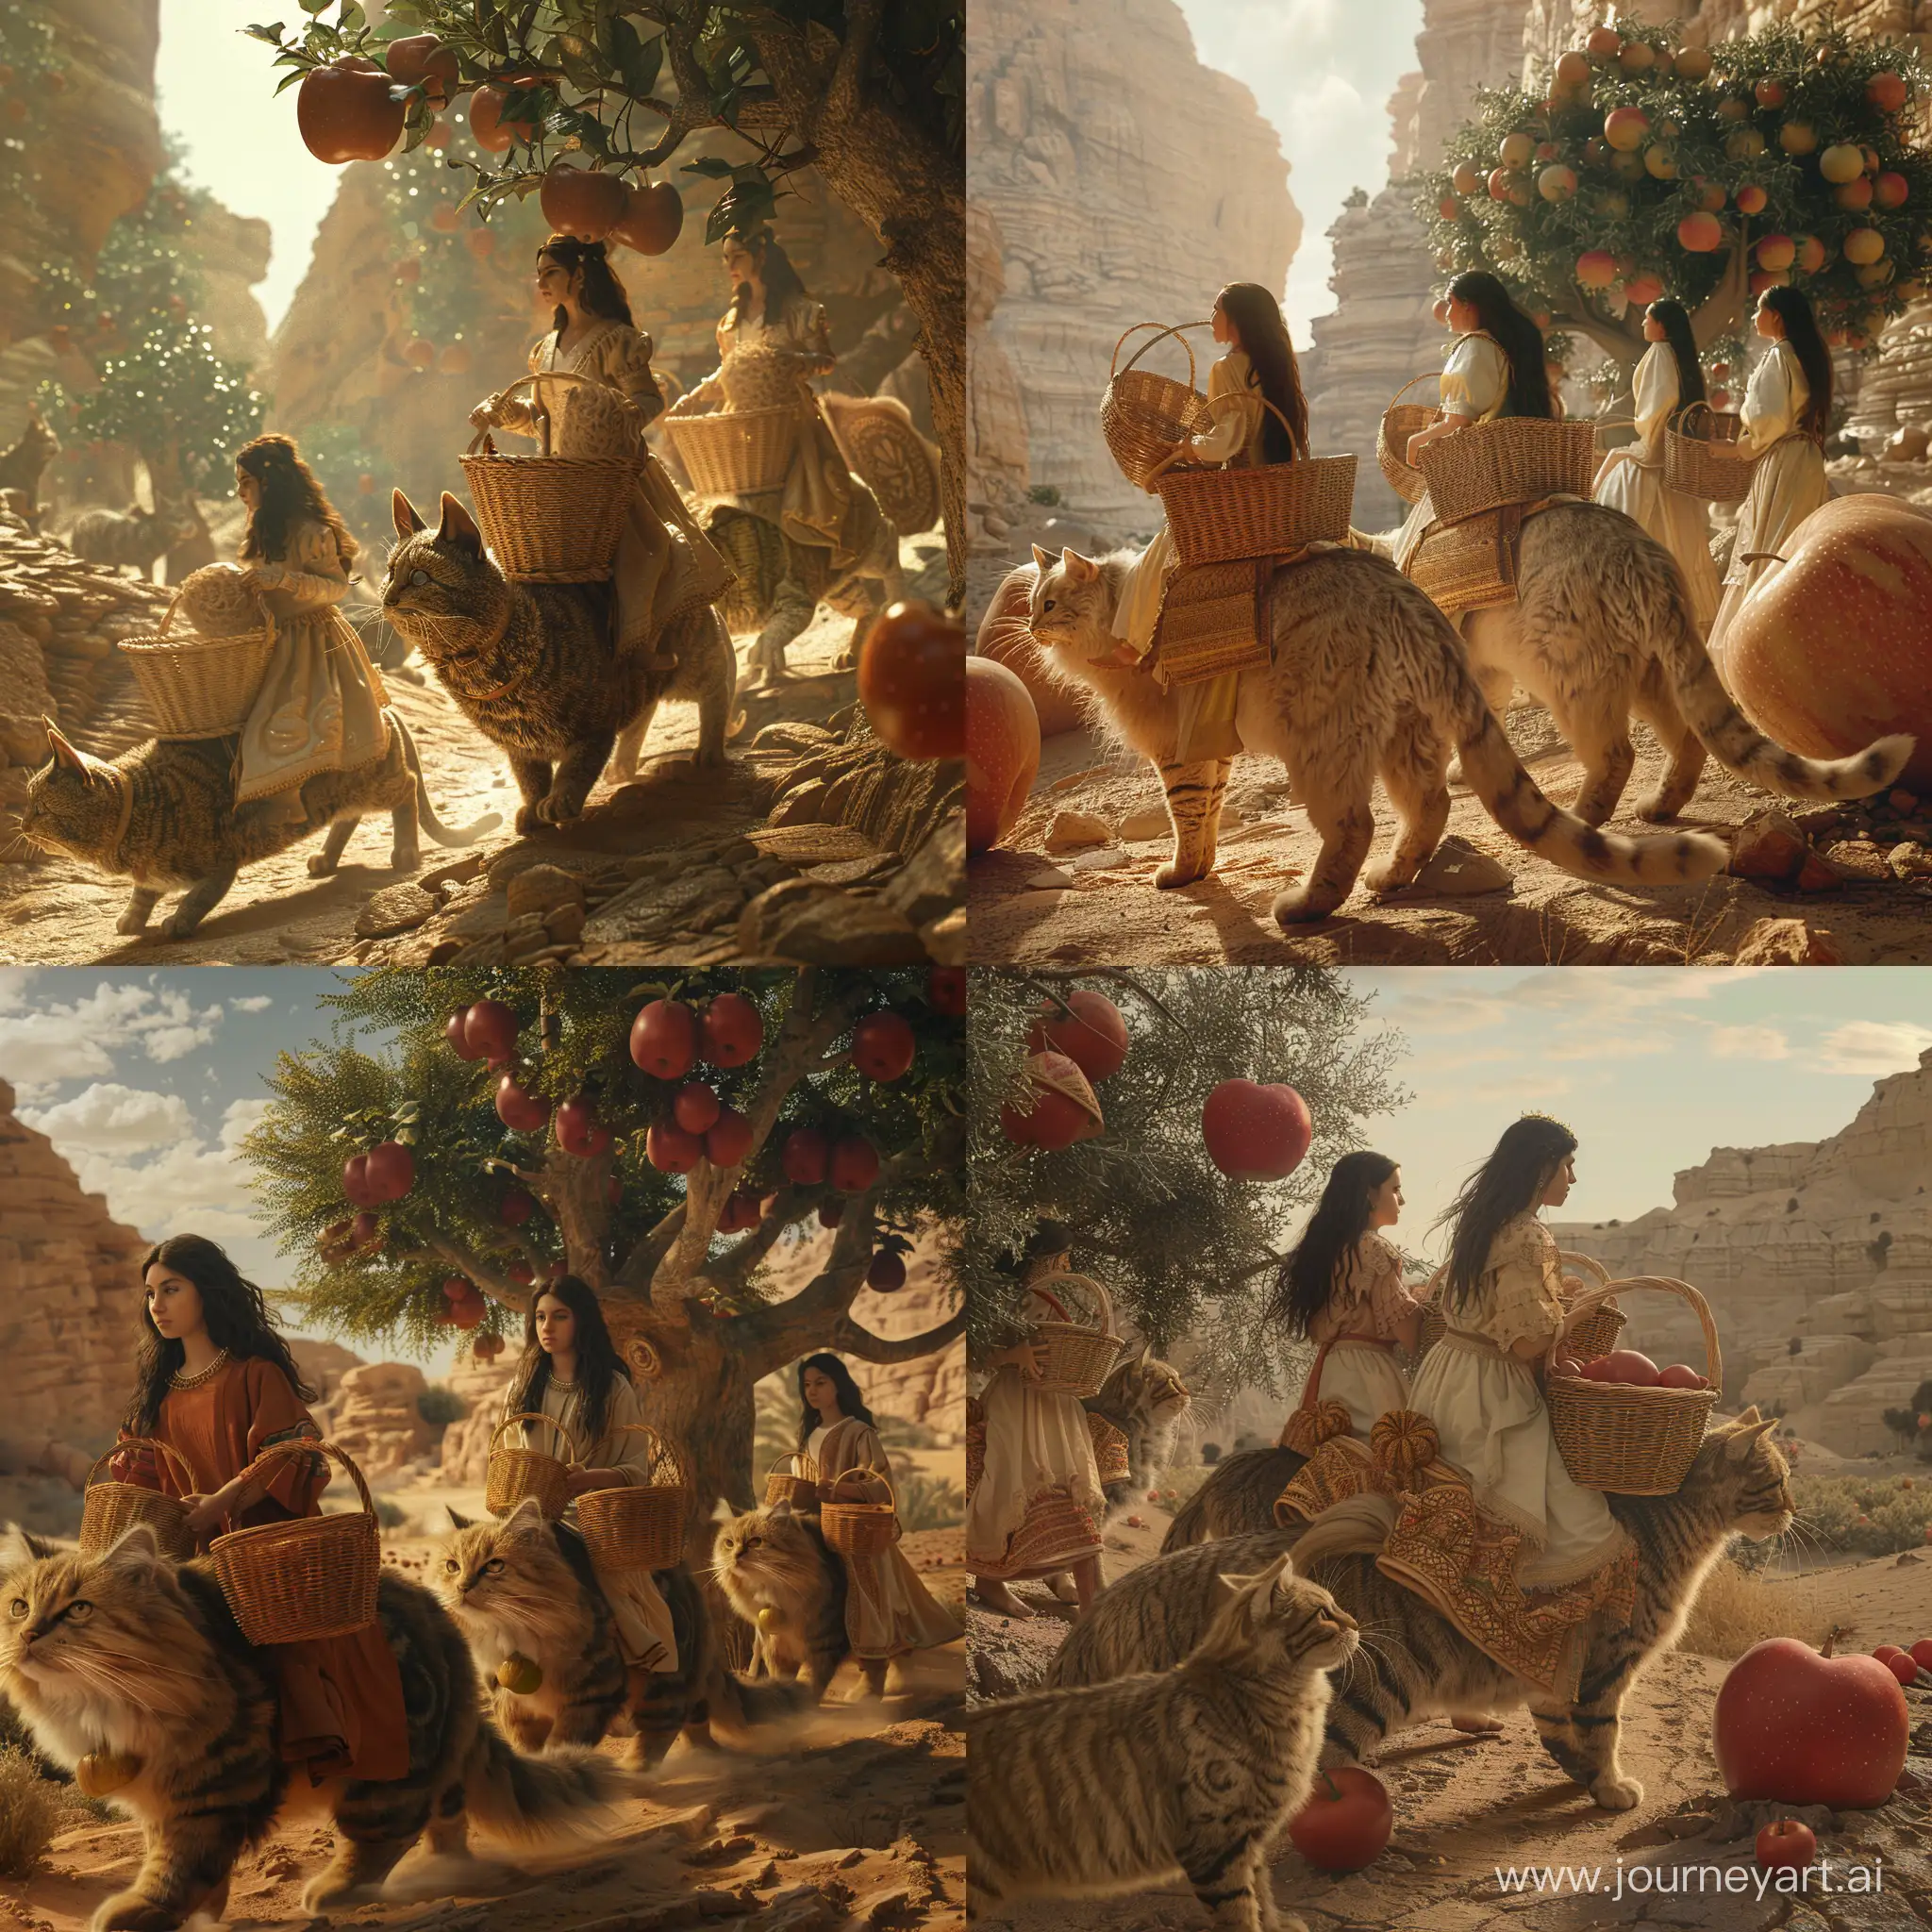 Persian-Women-Riding-Giant-Cats-towards-Enormous-Apple-Tree-in-Ancient-Desert-Civilization